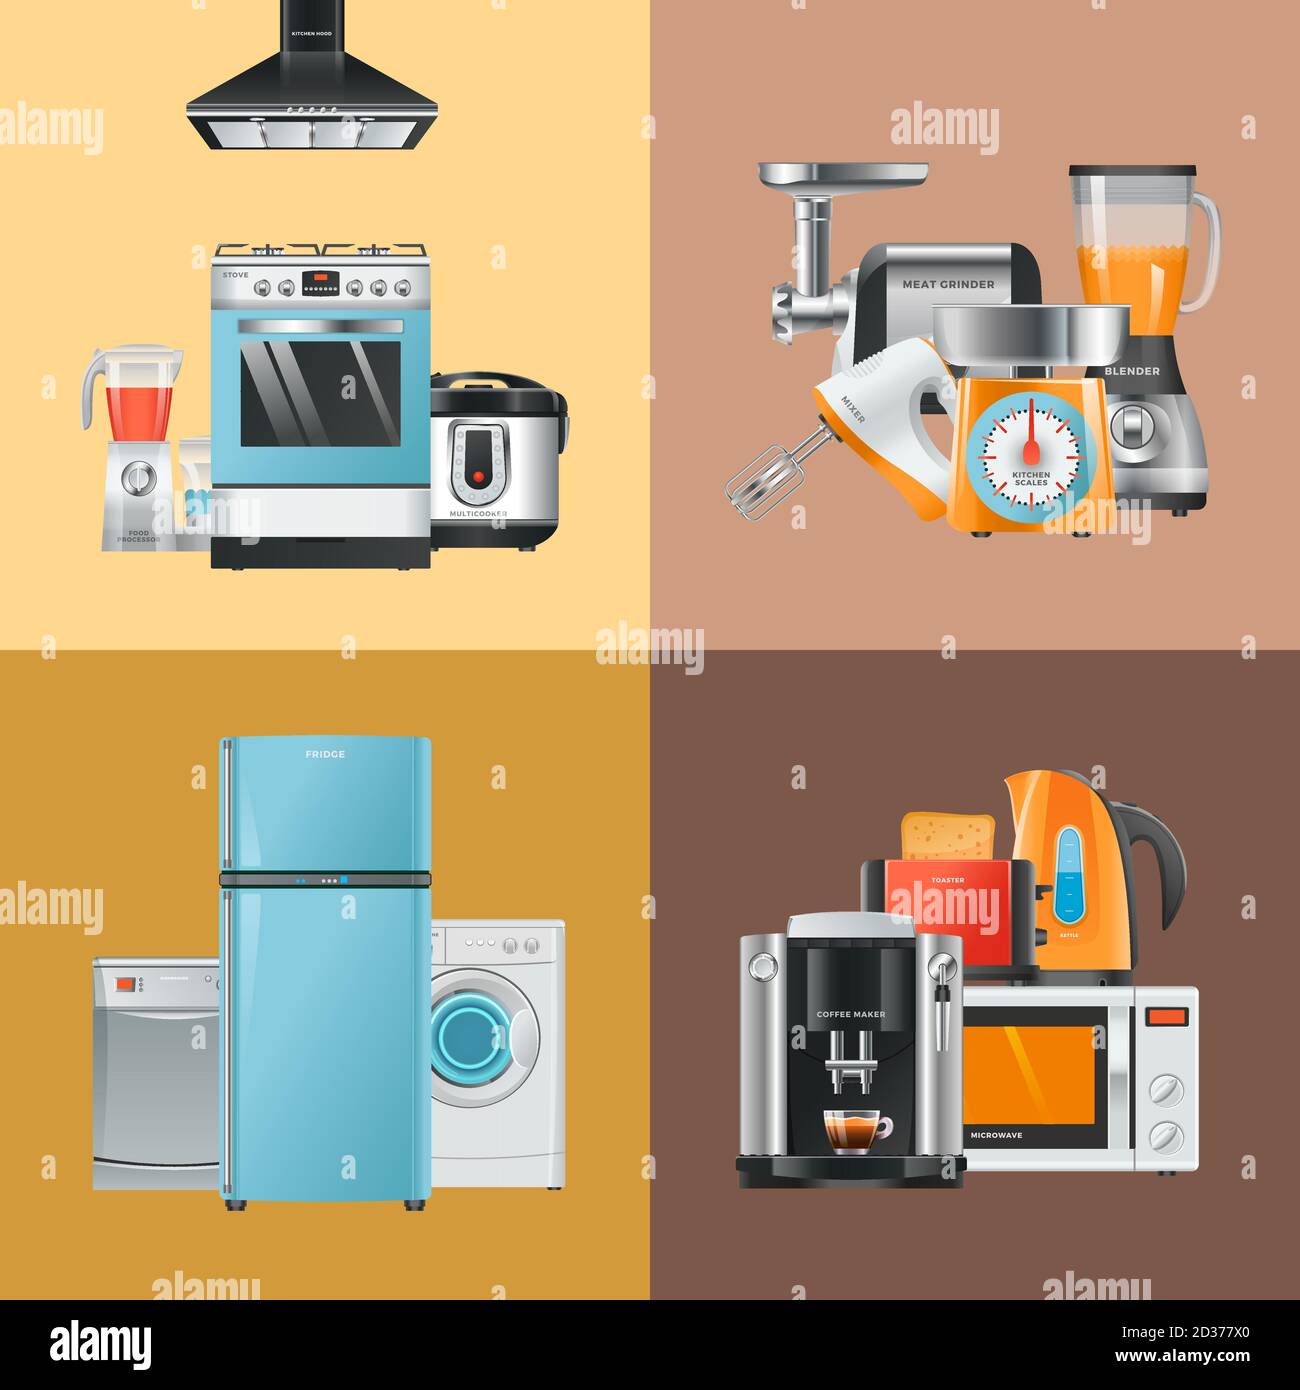 https://c8.alamy.com/comp/2D377X0/appliances-realistic-home-electrical-equipment-refrigerator-washing-machine-microwave-blender-mixer-hood-gas-stove-vector-collection-2D377X0.jpg